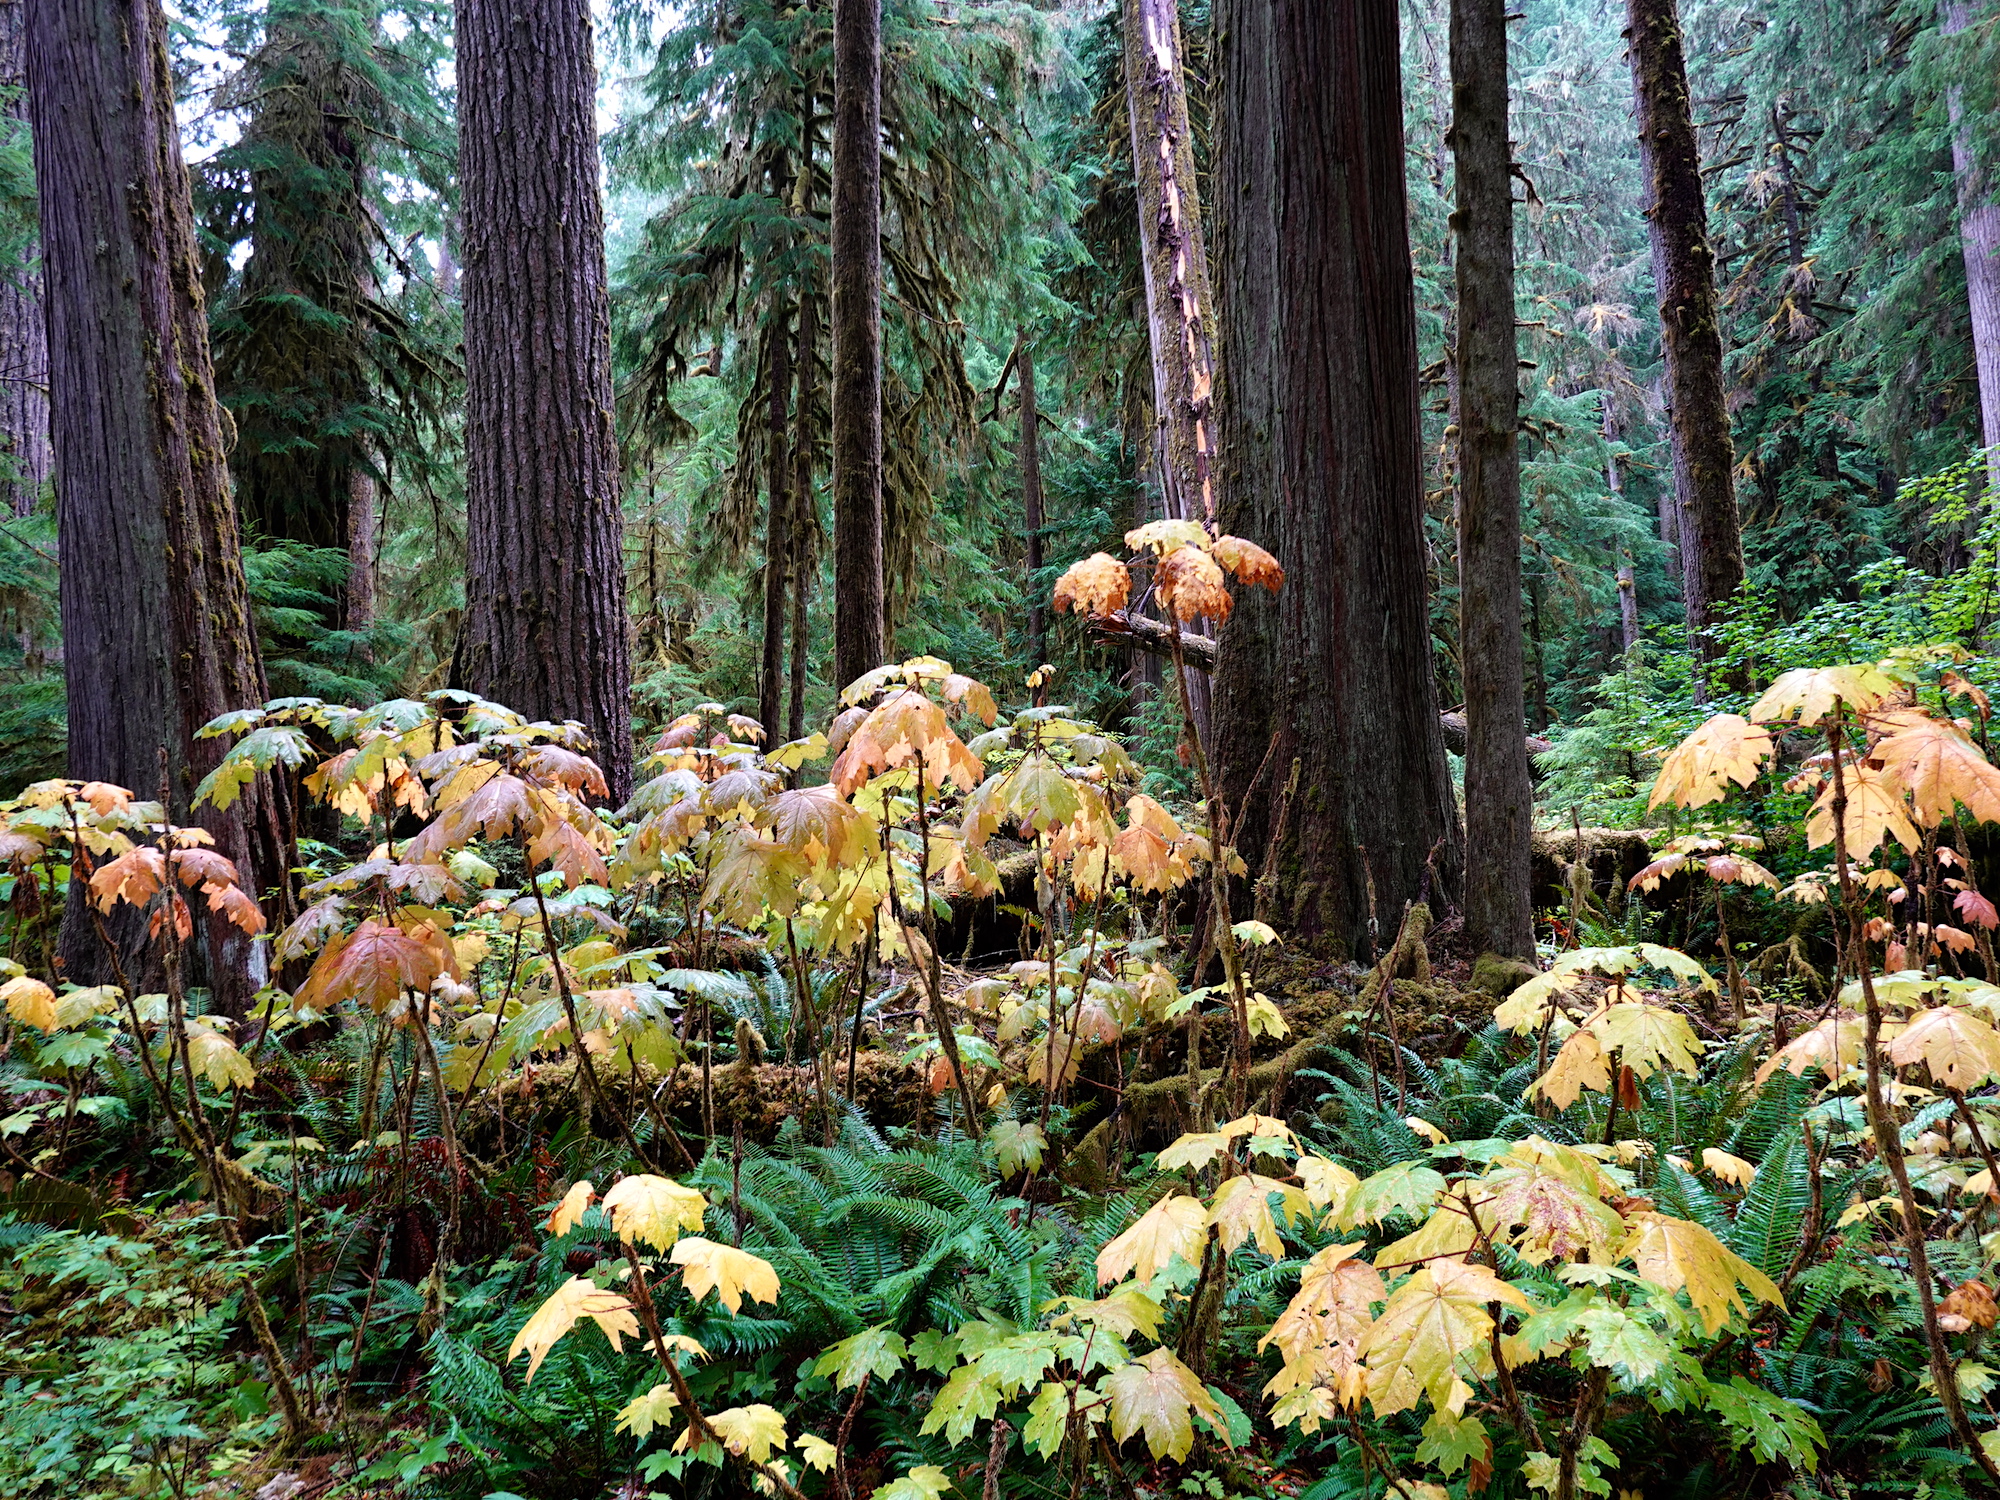 A patch of plants with tall woody stems and large yellowish-orange, maple-shaped leaves surrounded by mossy tree trunks in a dense forest. 